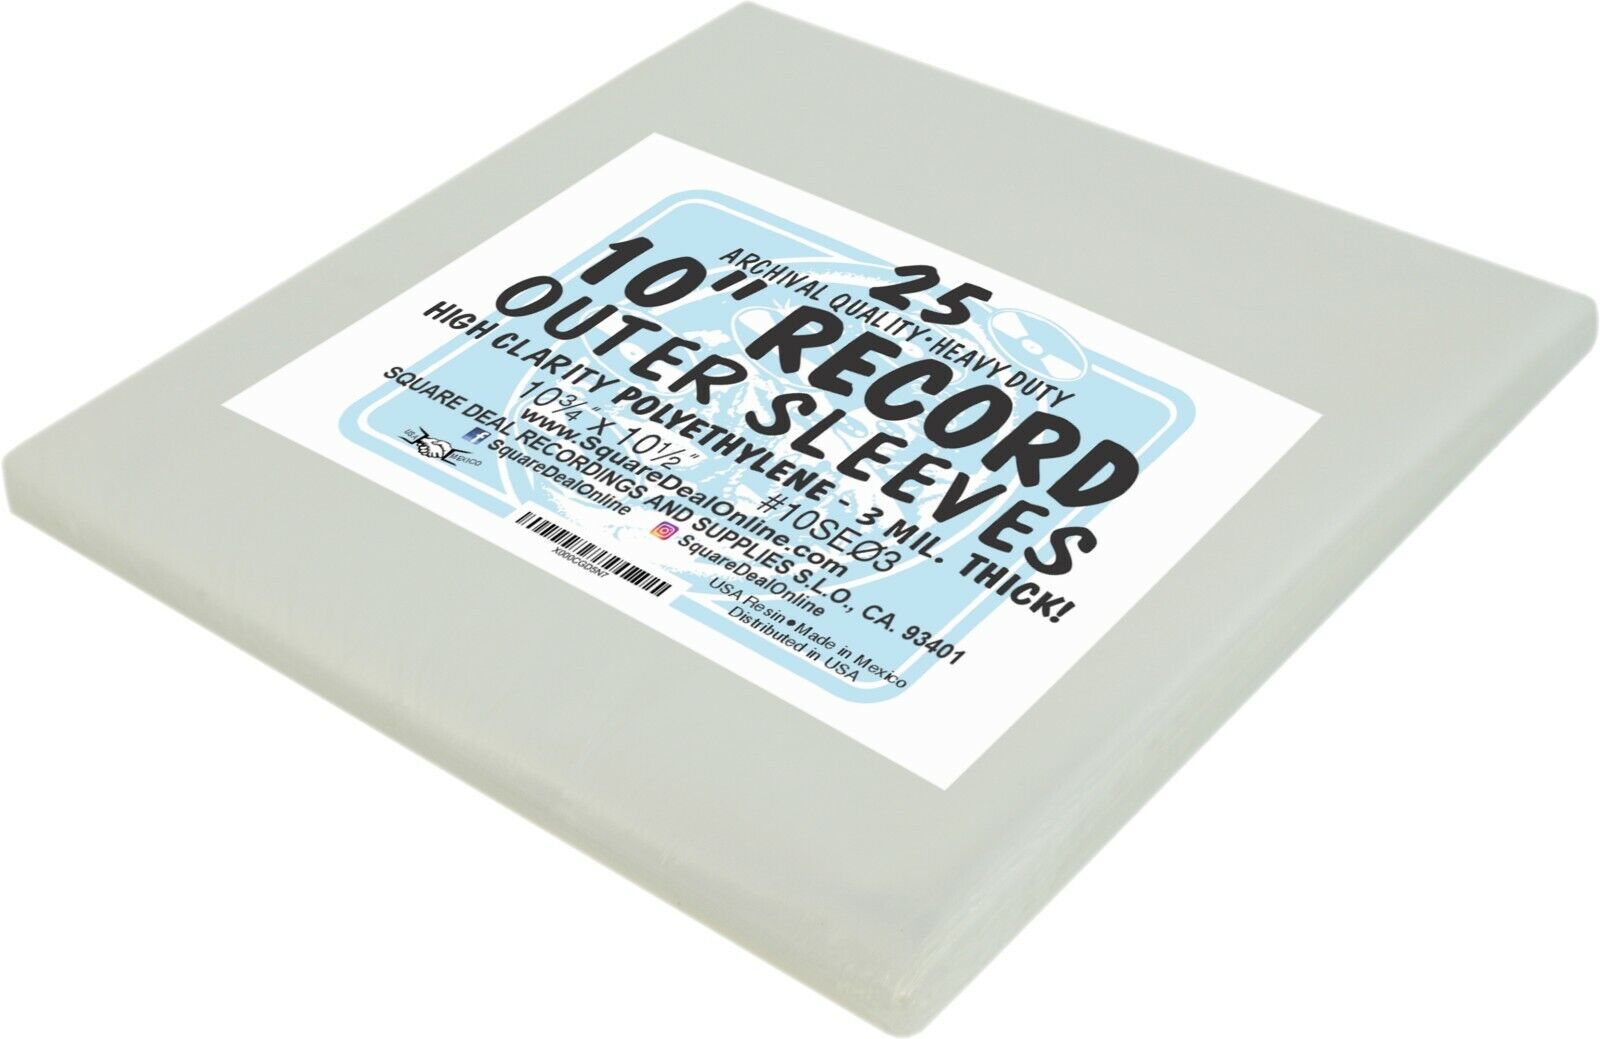 (25) 10" Record Outer Sleeves Vinyl Outersleeves 3mil Polyethylene Bags #10SE03 Square Deal Recordings & Supplies 10SE03